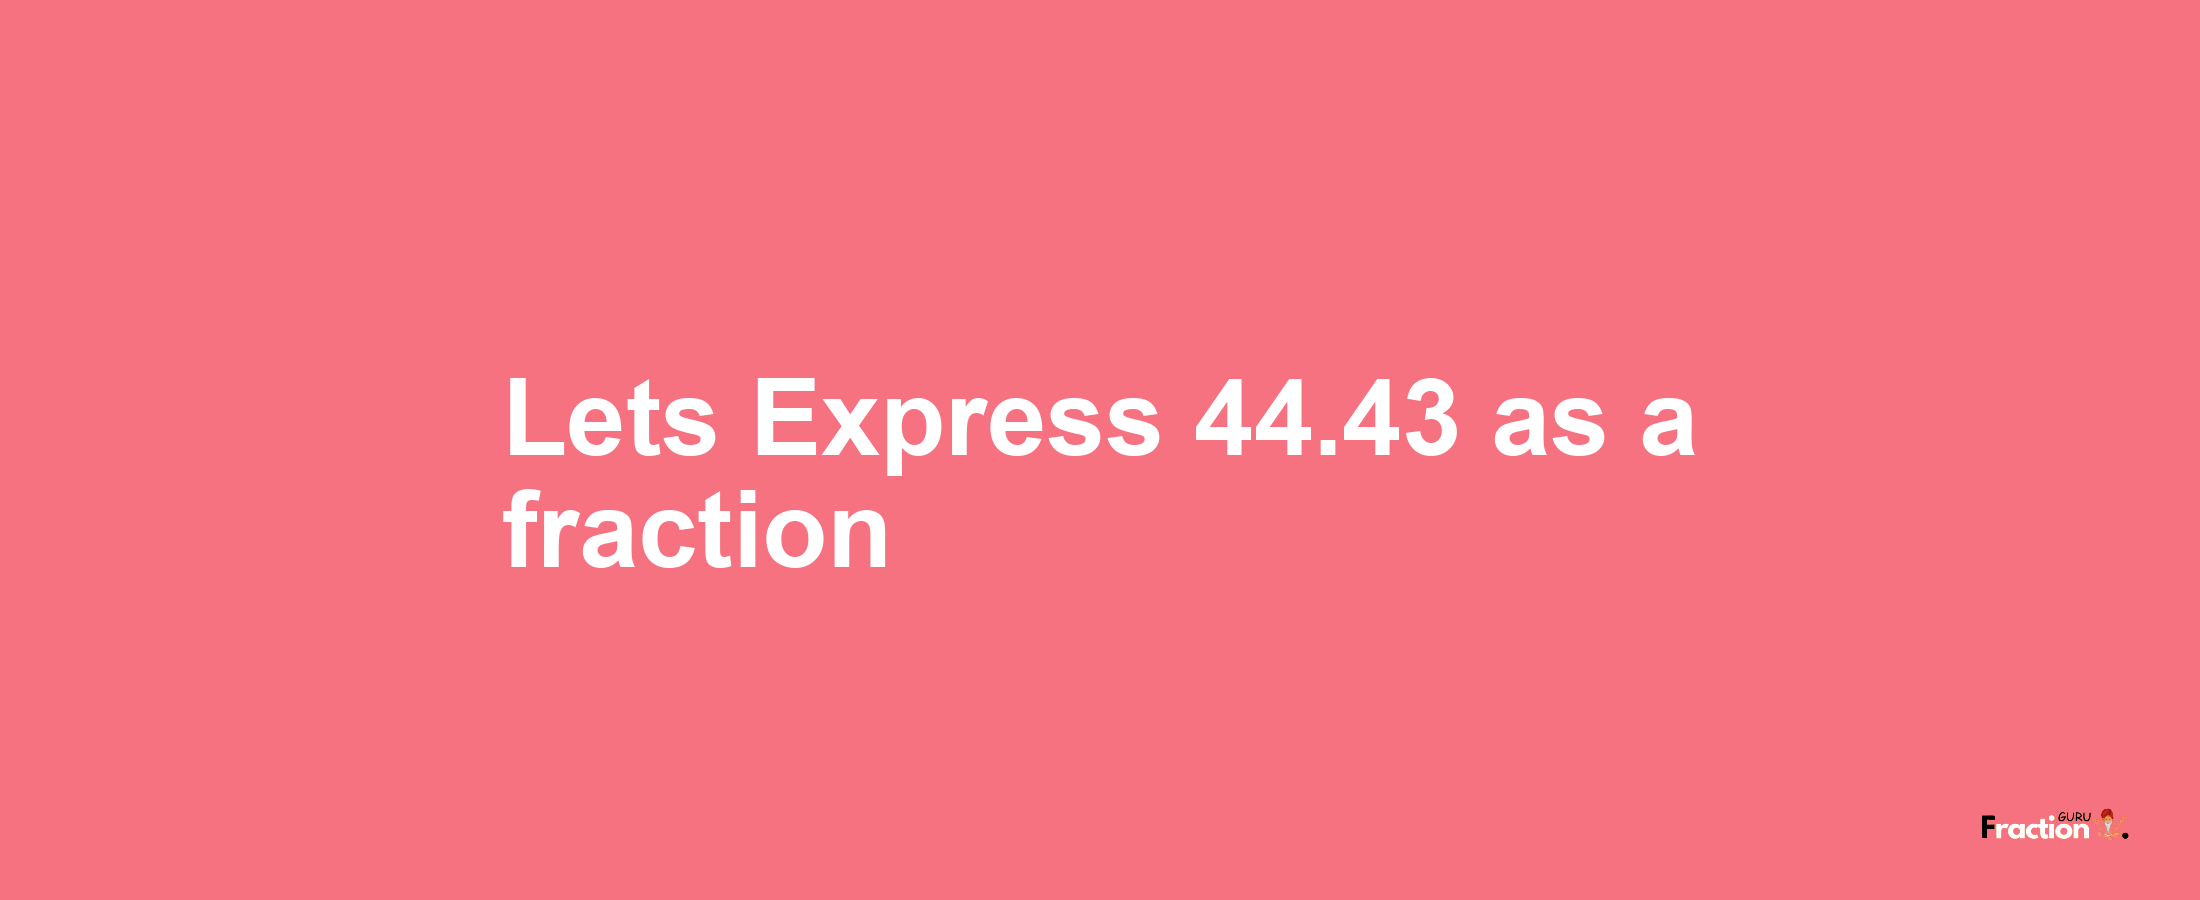 Lets Express 44.43 as afraction